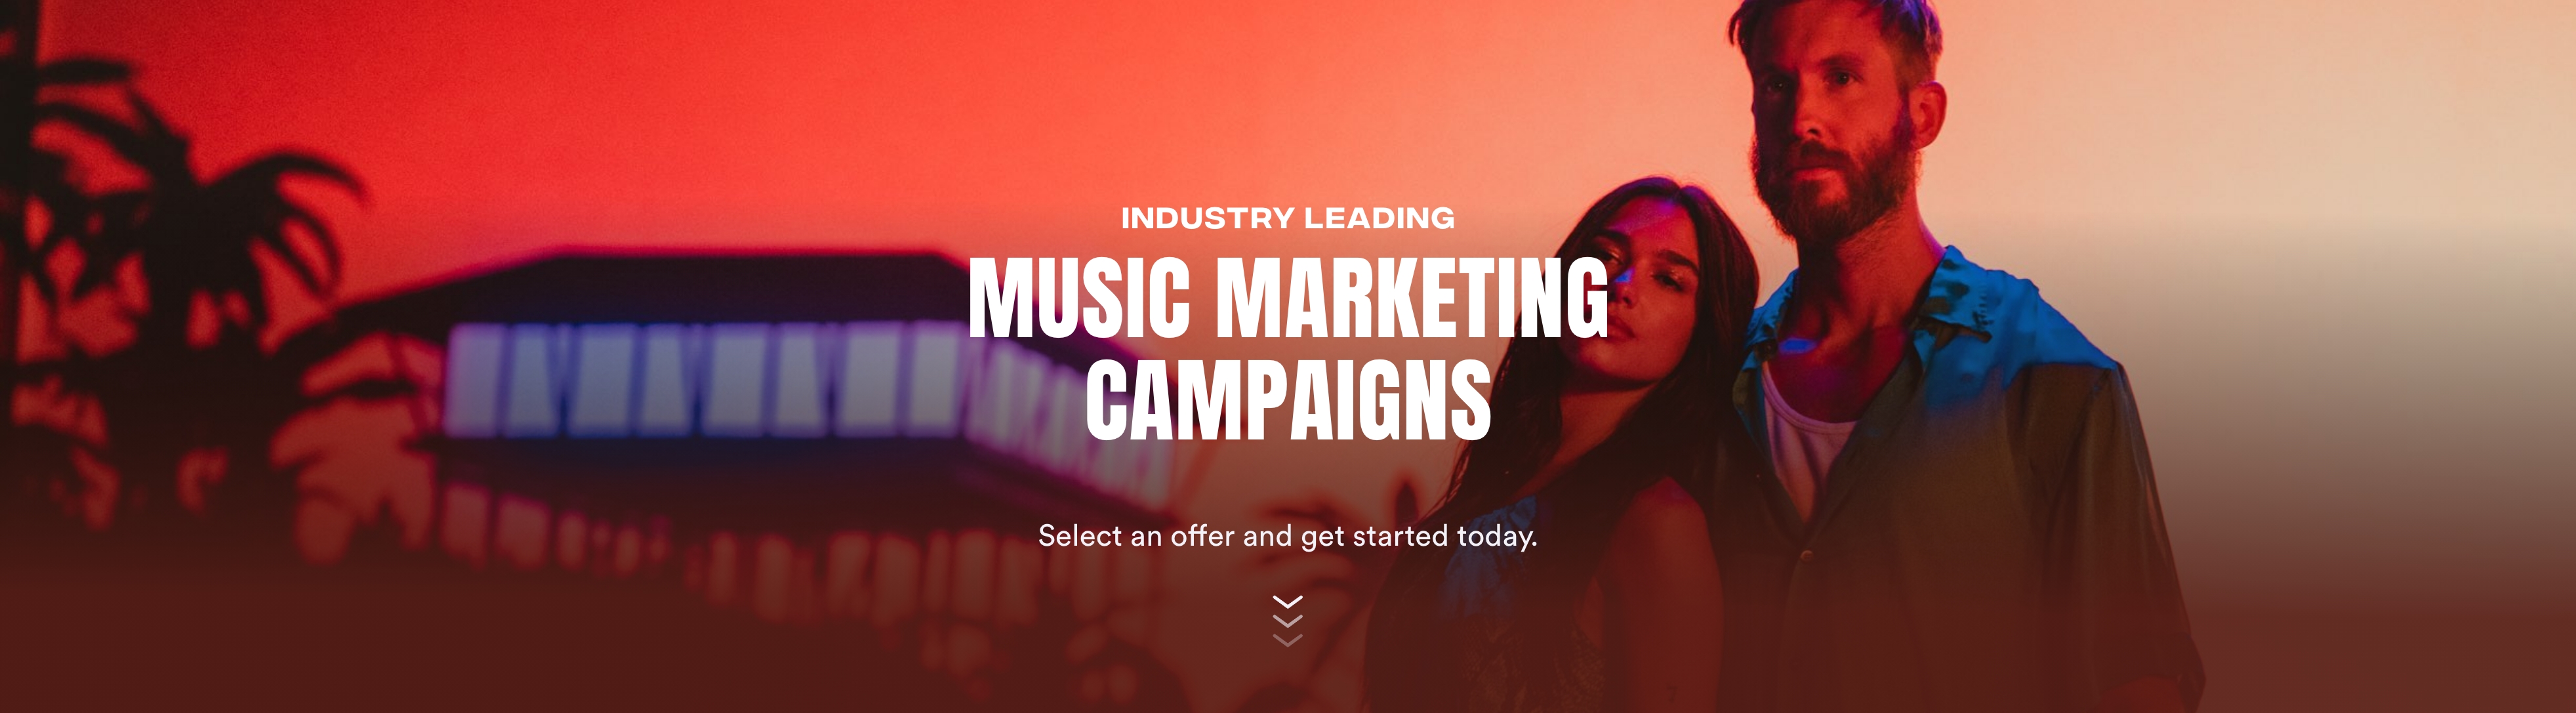 Industry Leading - Music Marketing Campaign